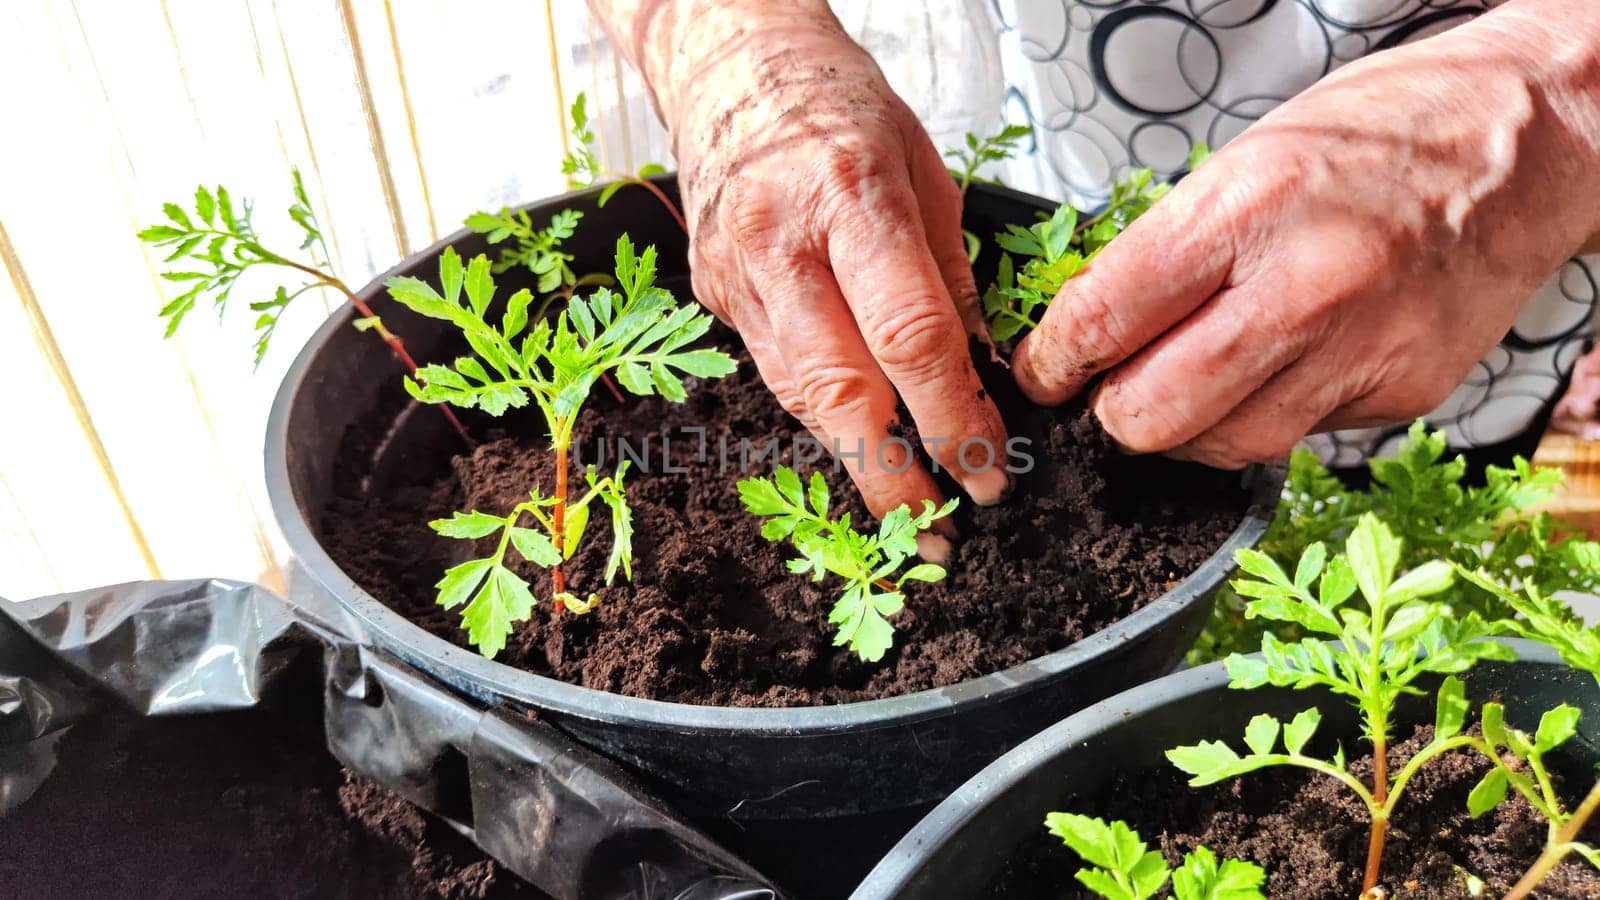 Planting marigold flowers in a pot. Reproduction of plants in spring. Young flower shoots and greenery for the garden. The hands of elderly woman, bucket of earth, green bushes and twigs with leaves